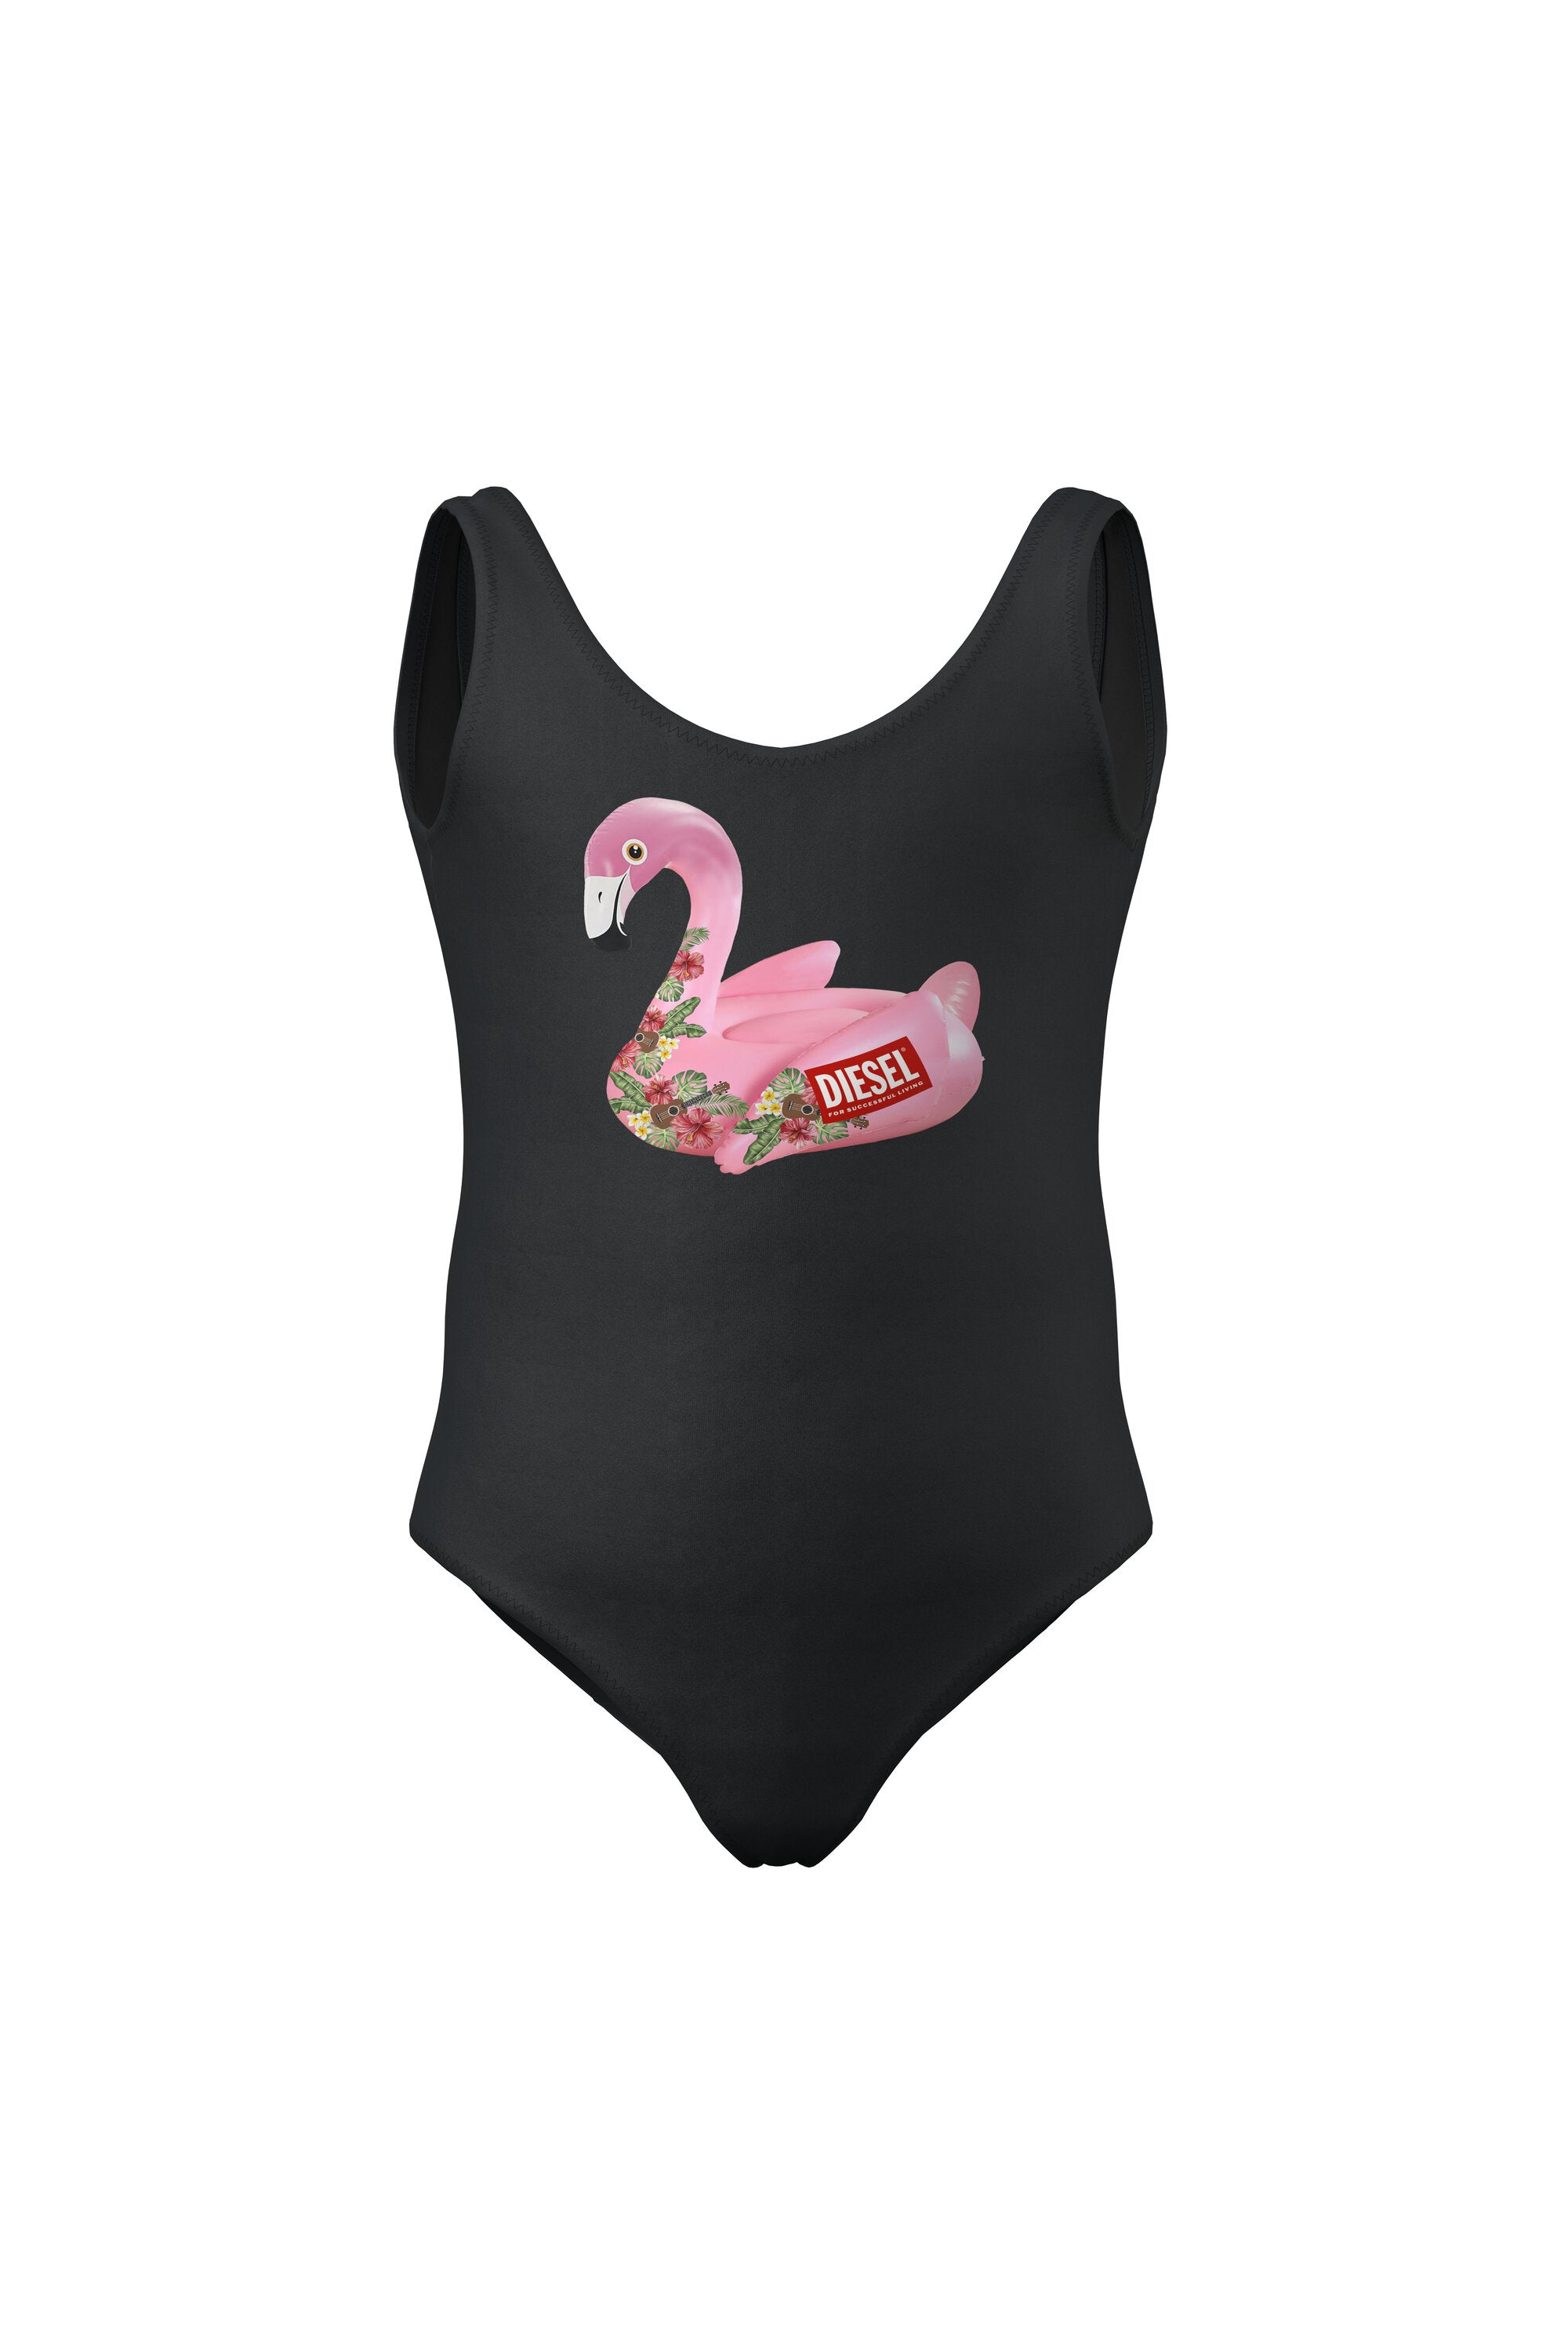 Black Lycra one-piece swimsuit with pink flamingo print